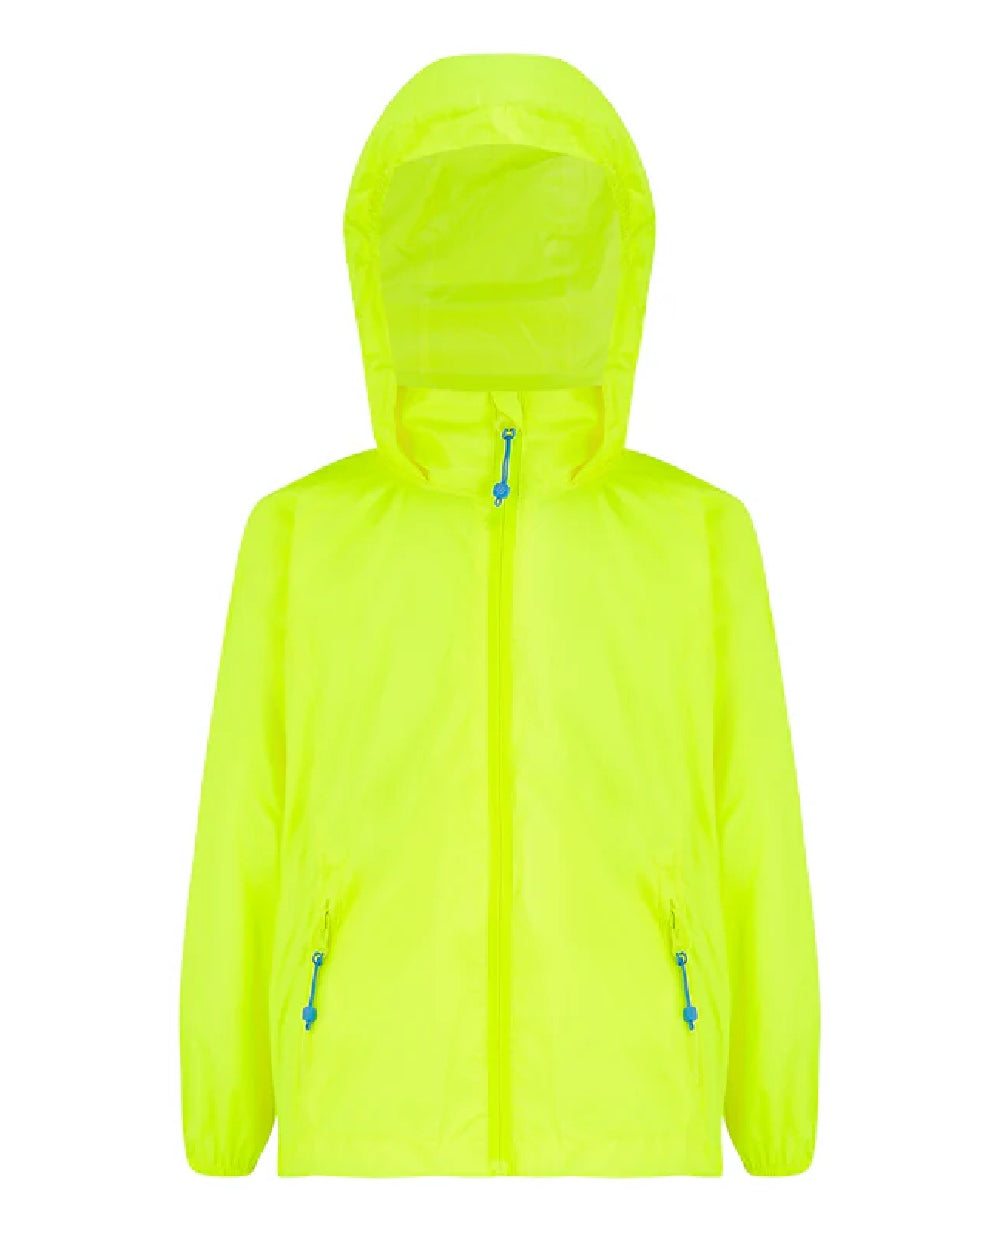 Neon Yellow coloured Mac In A Sac Origin Childrens Mini Packable Waterproof Jacket on white background 